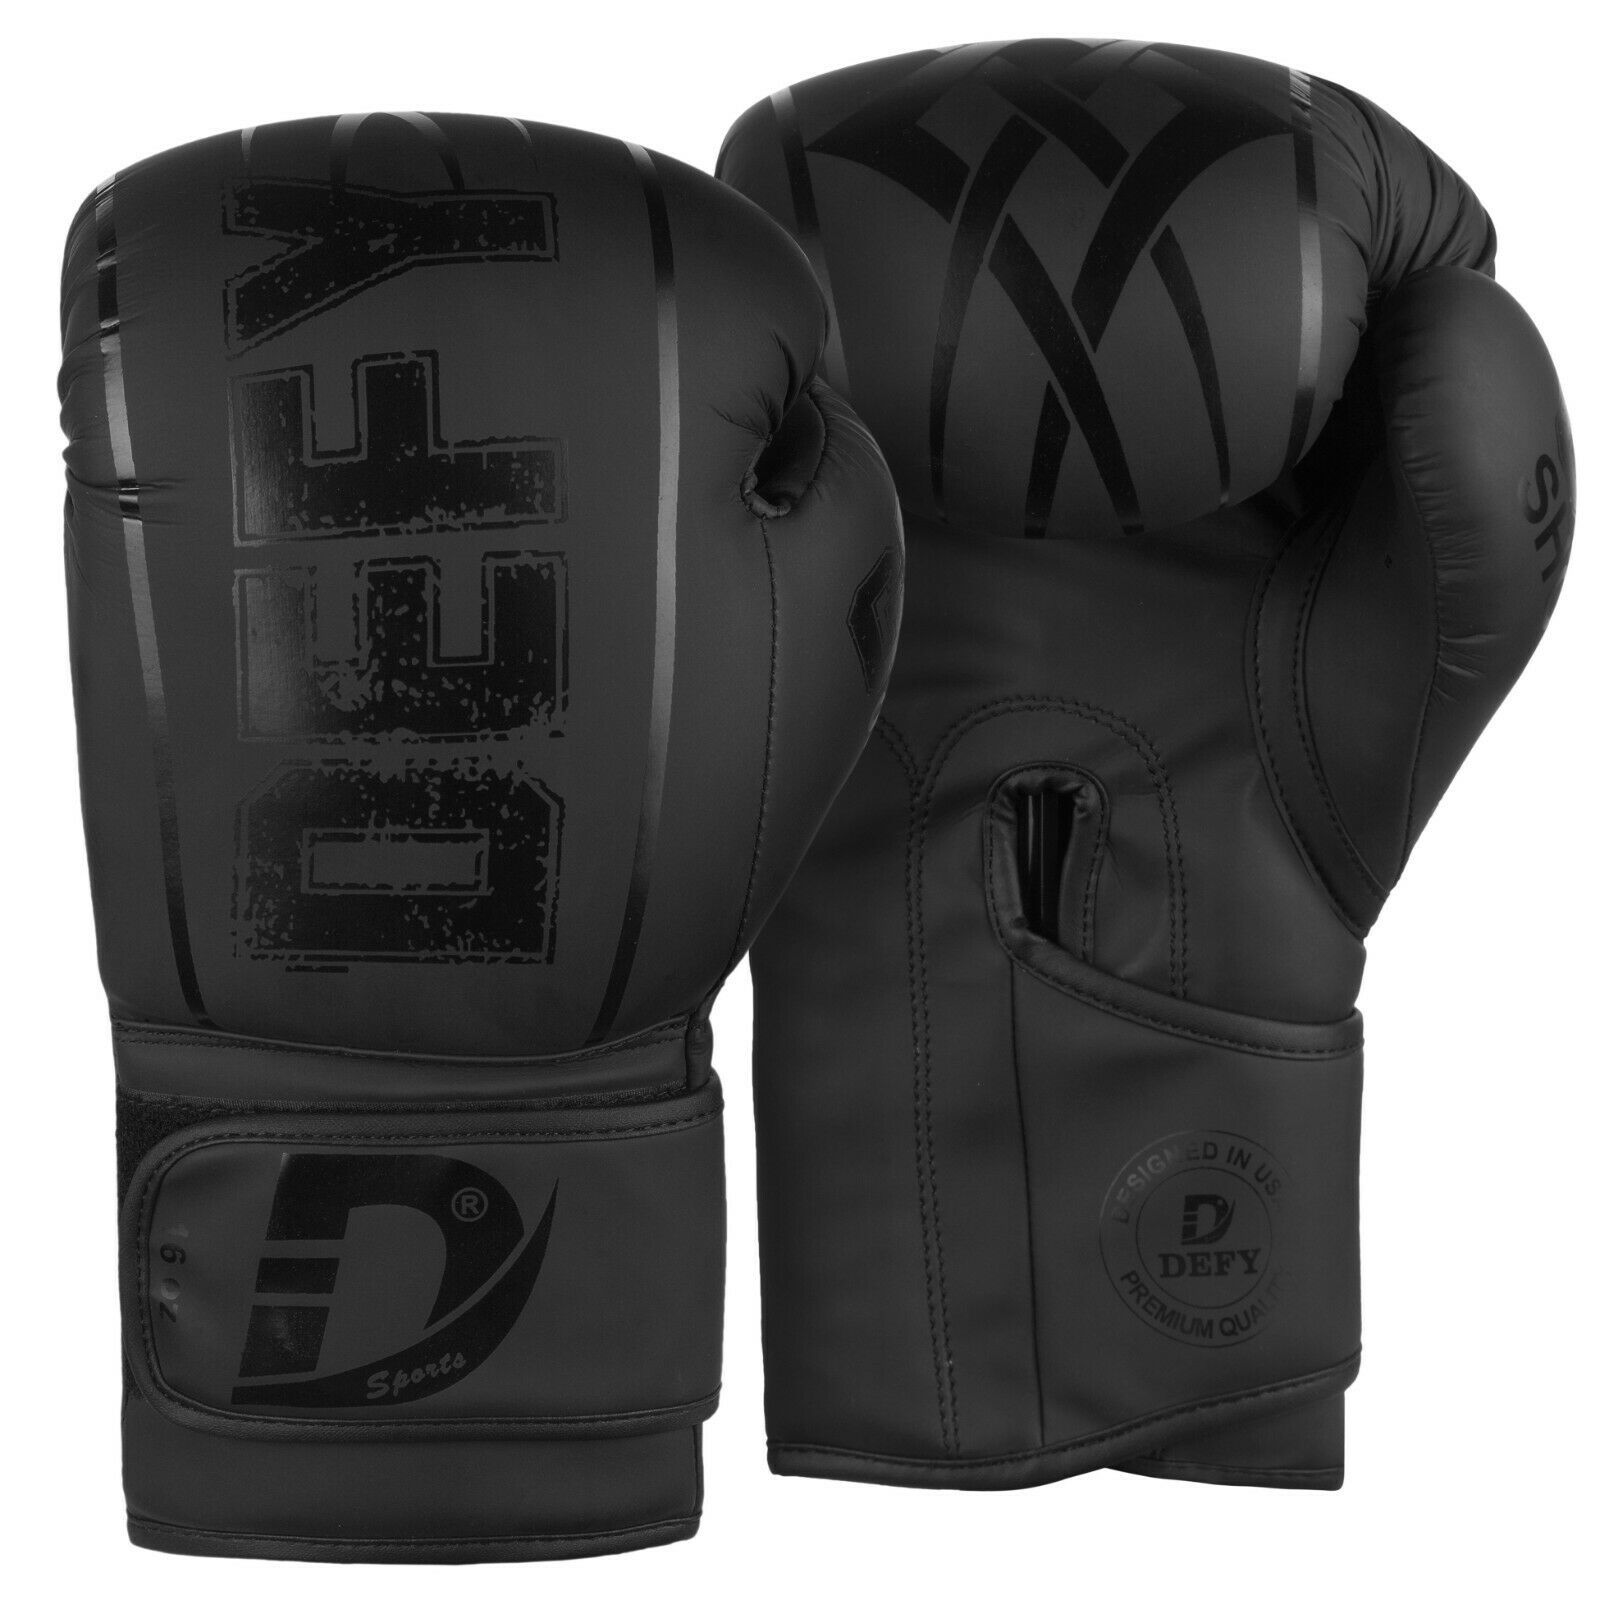 DEFY® Synthetic Leather Boxing Glove Thai Punch Training Sparring Gloves Black